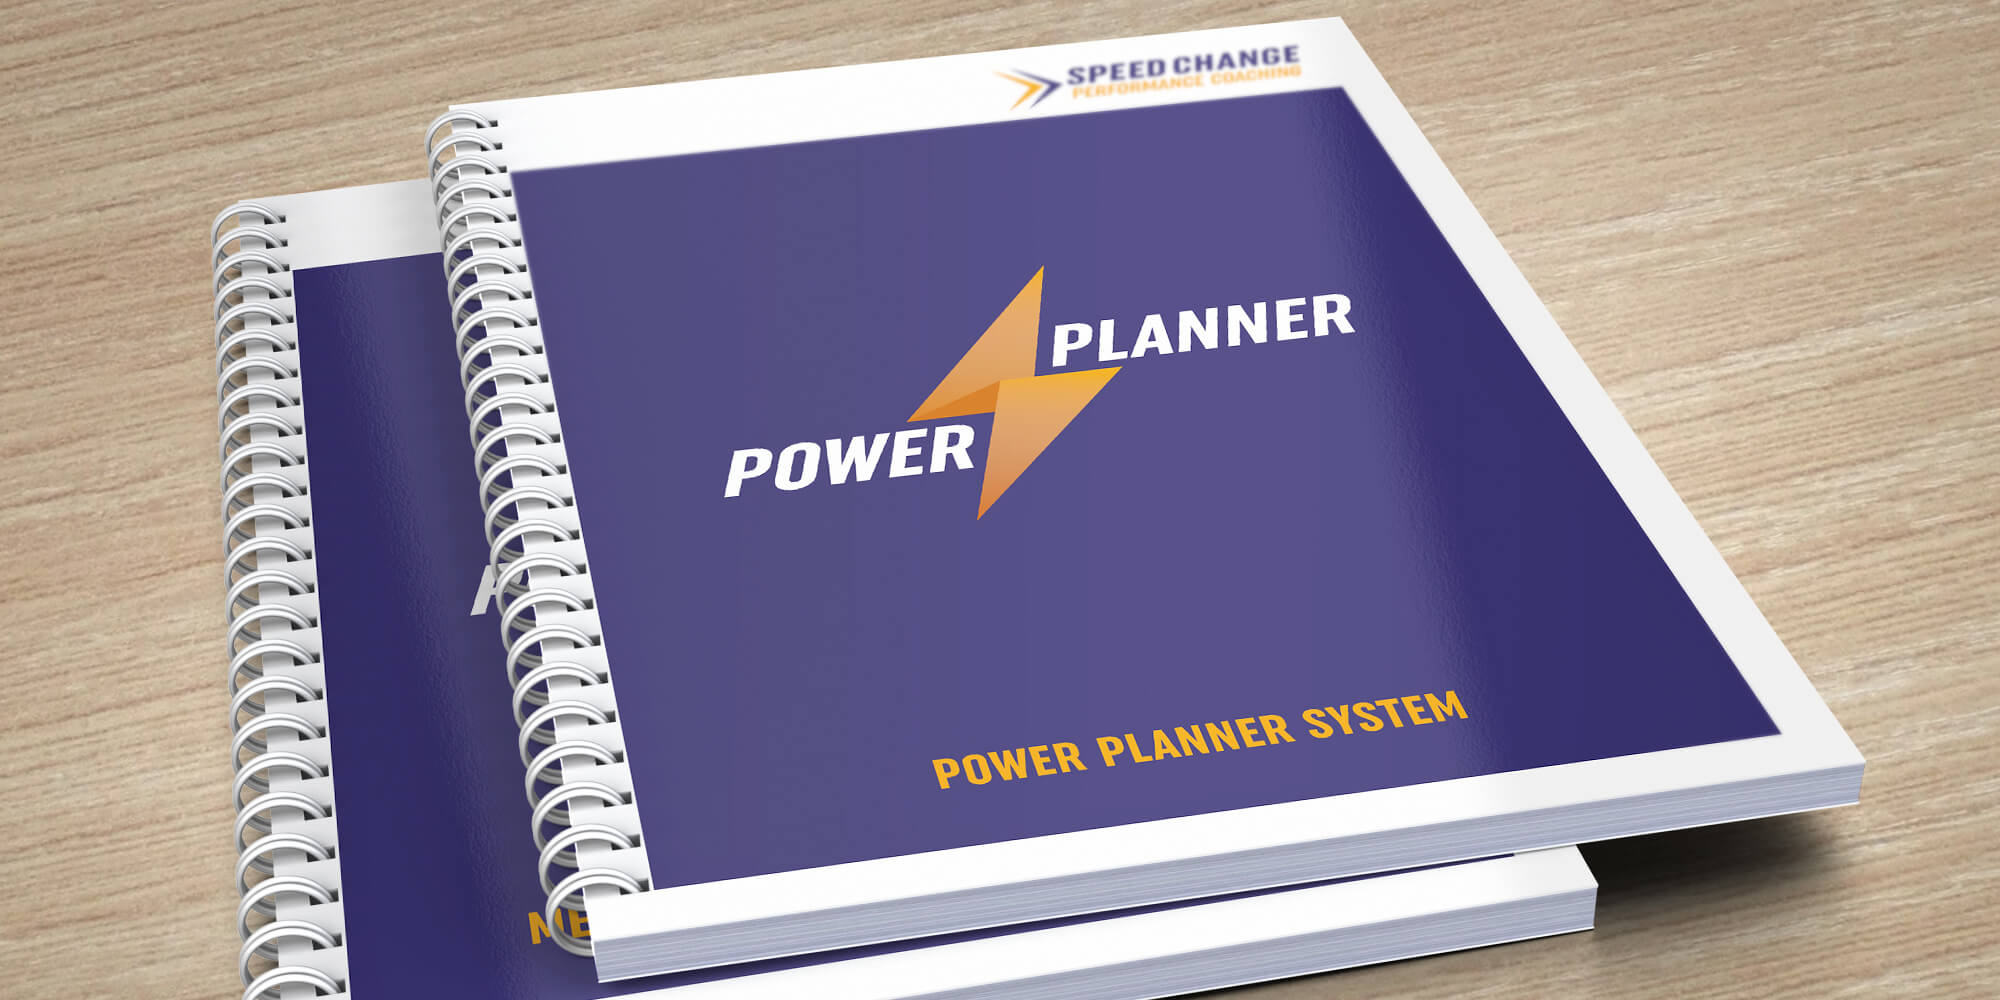 Results Power Planner